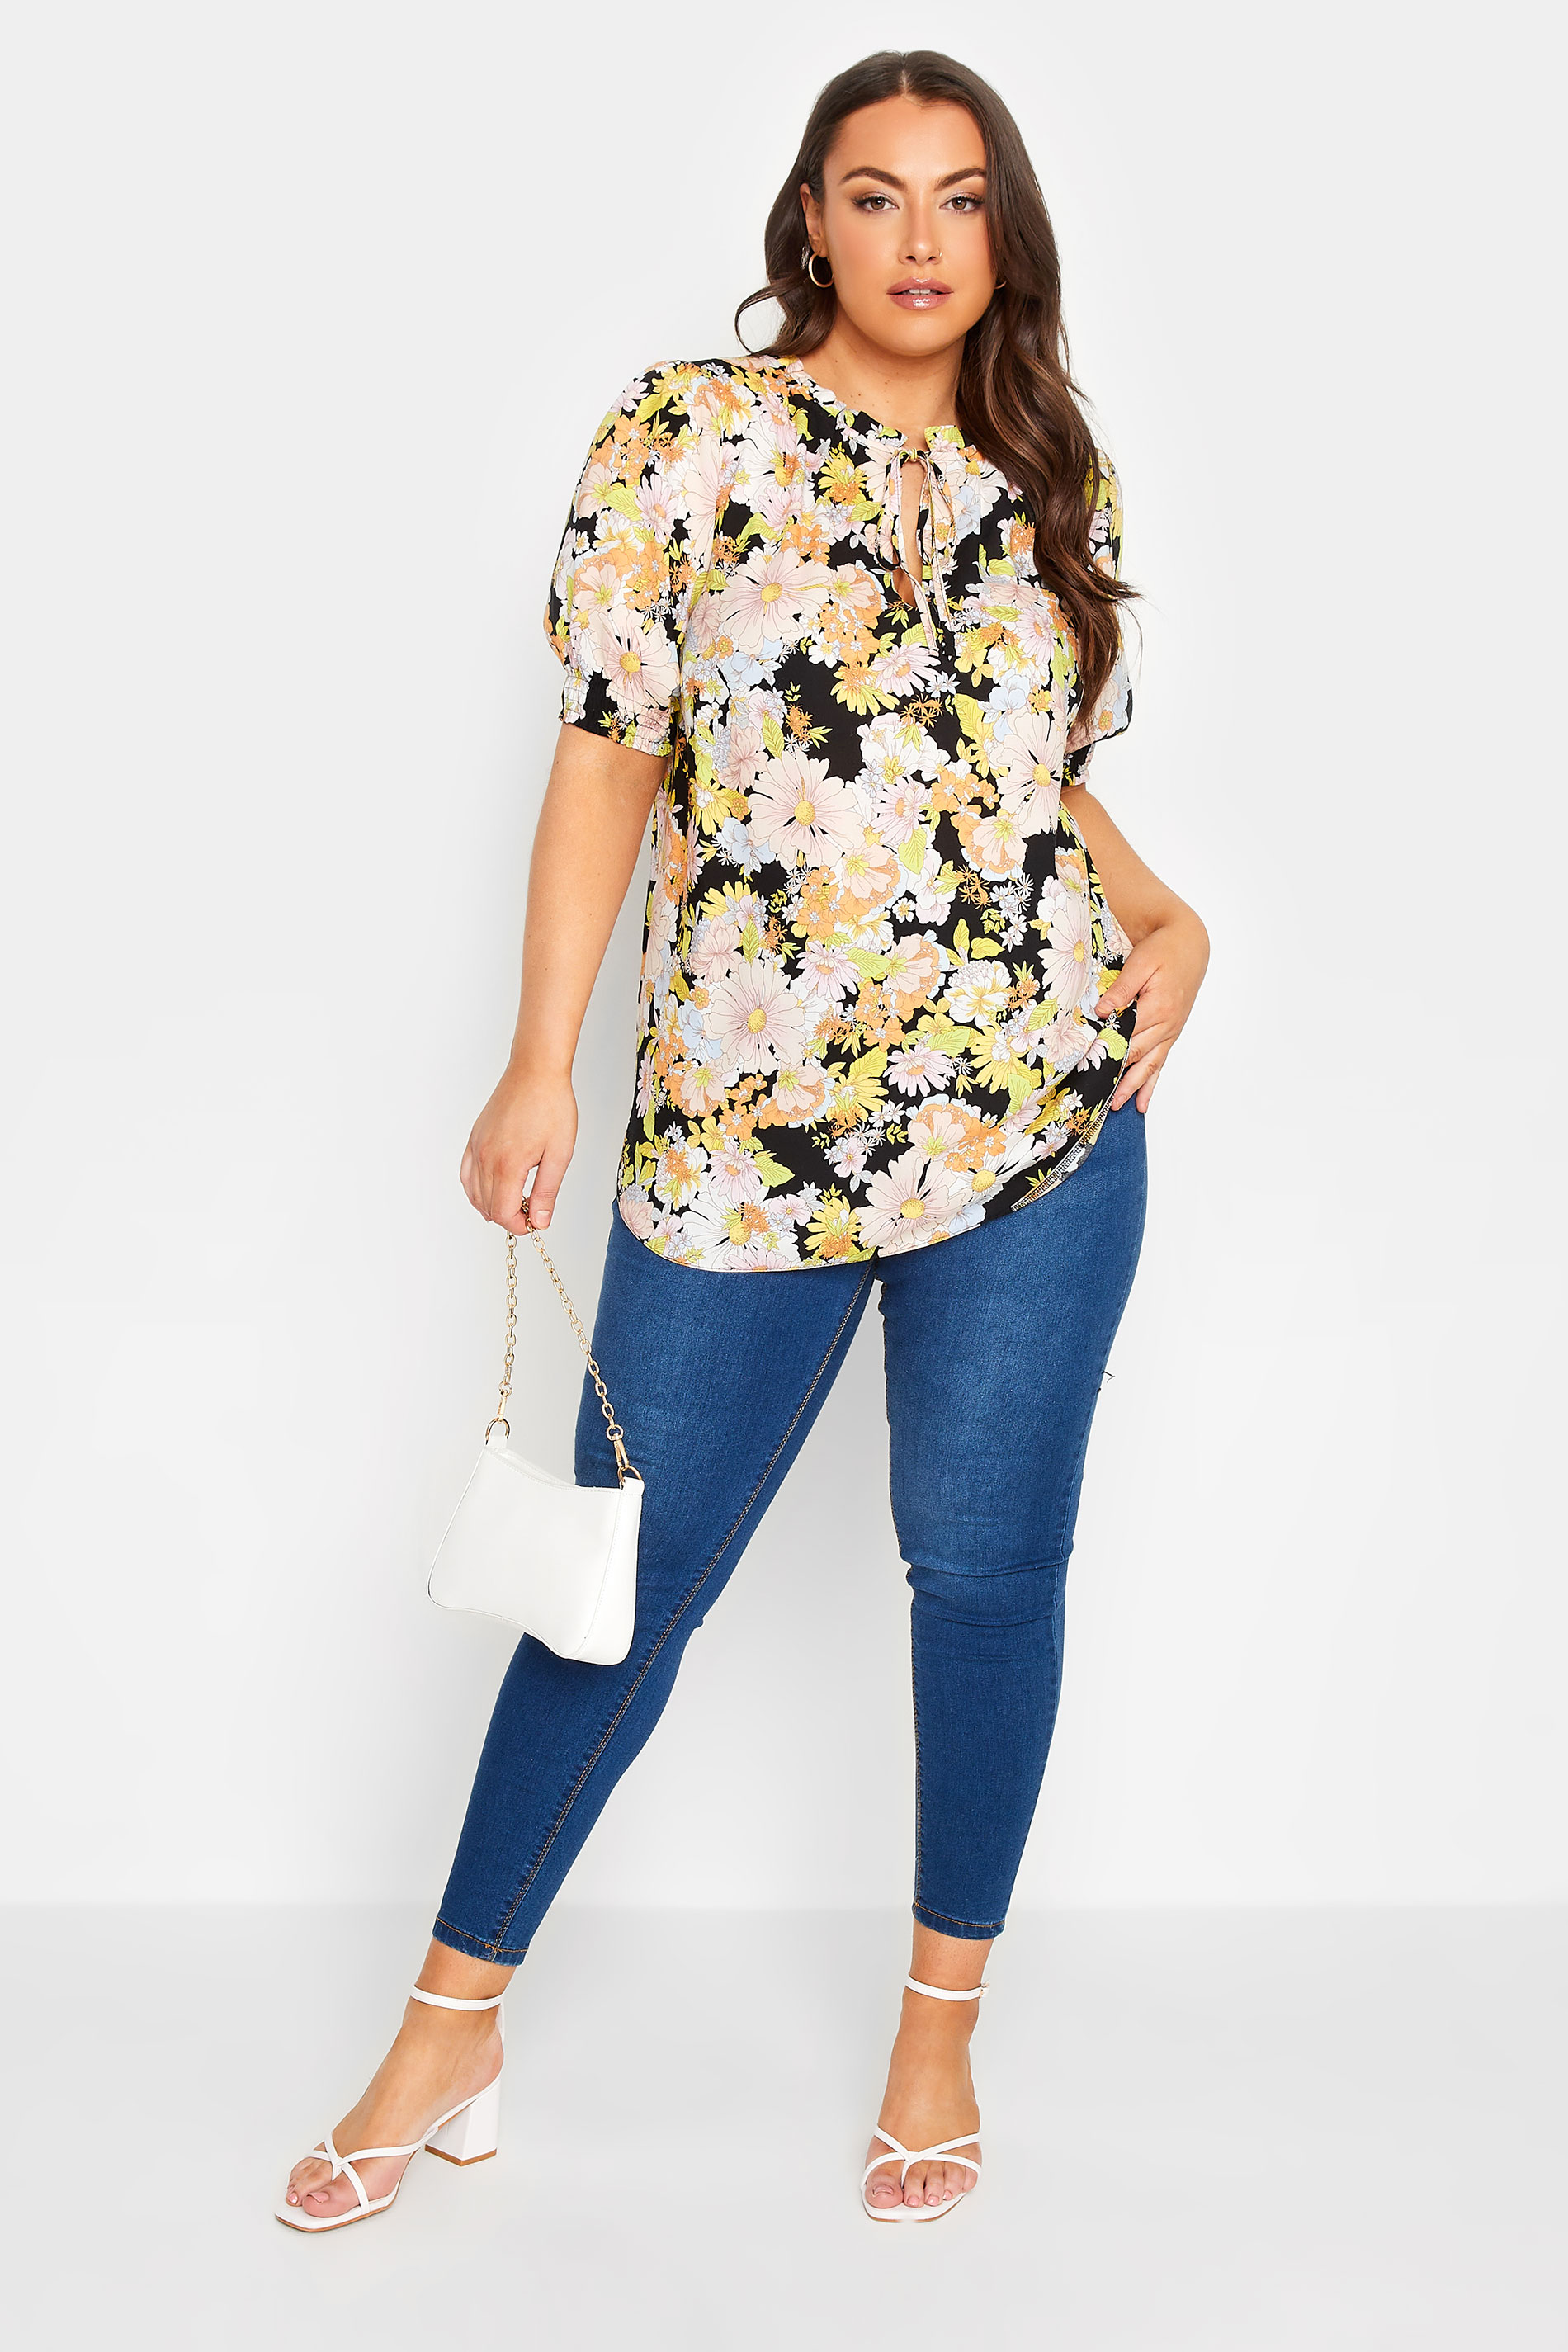 YOURS Plus Size Black & Yellow Floral Print Tie Neck Blouse | Yours Clothing 2